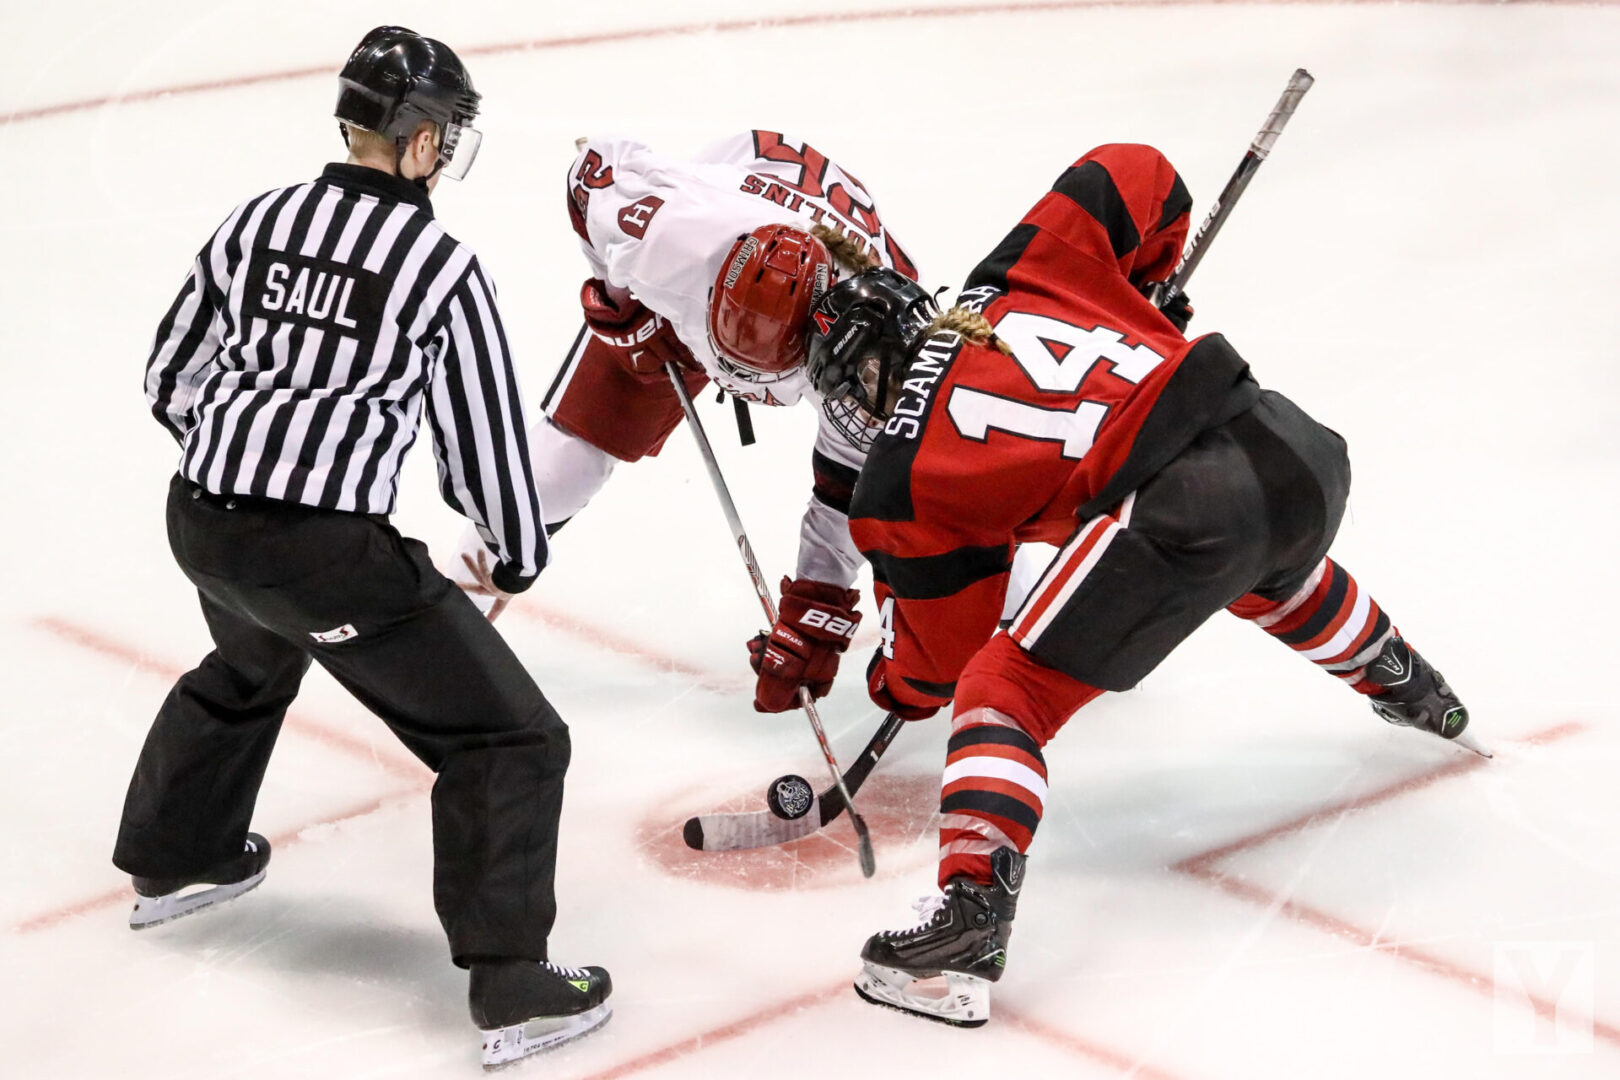 Two players one in red and other in white playing ice hockey, with the referee present.